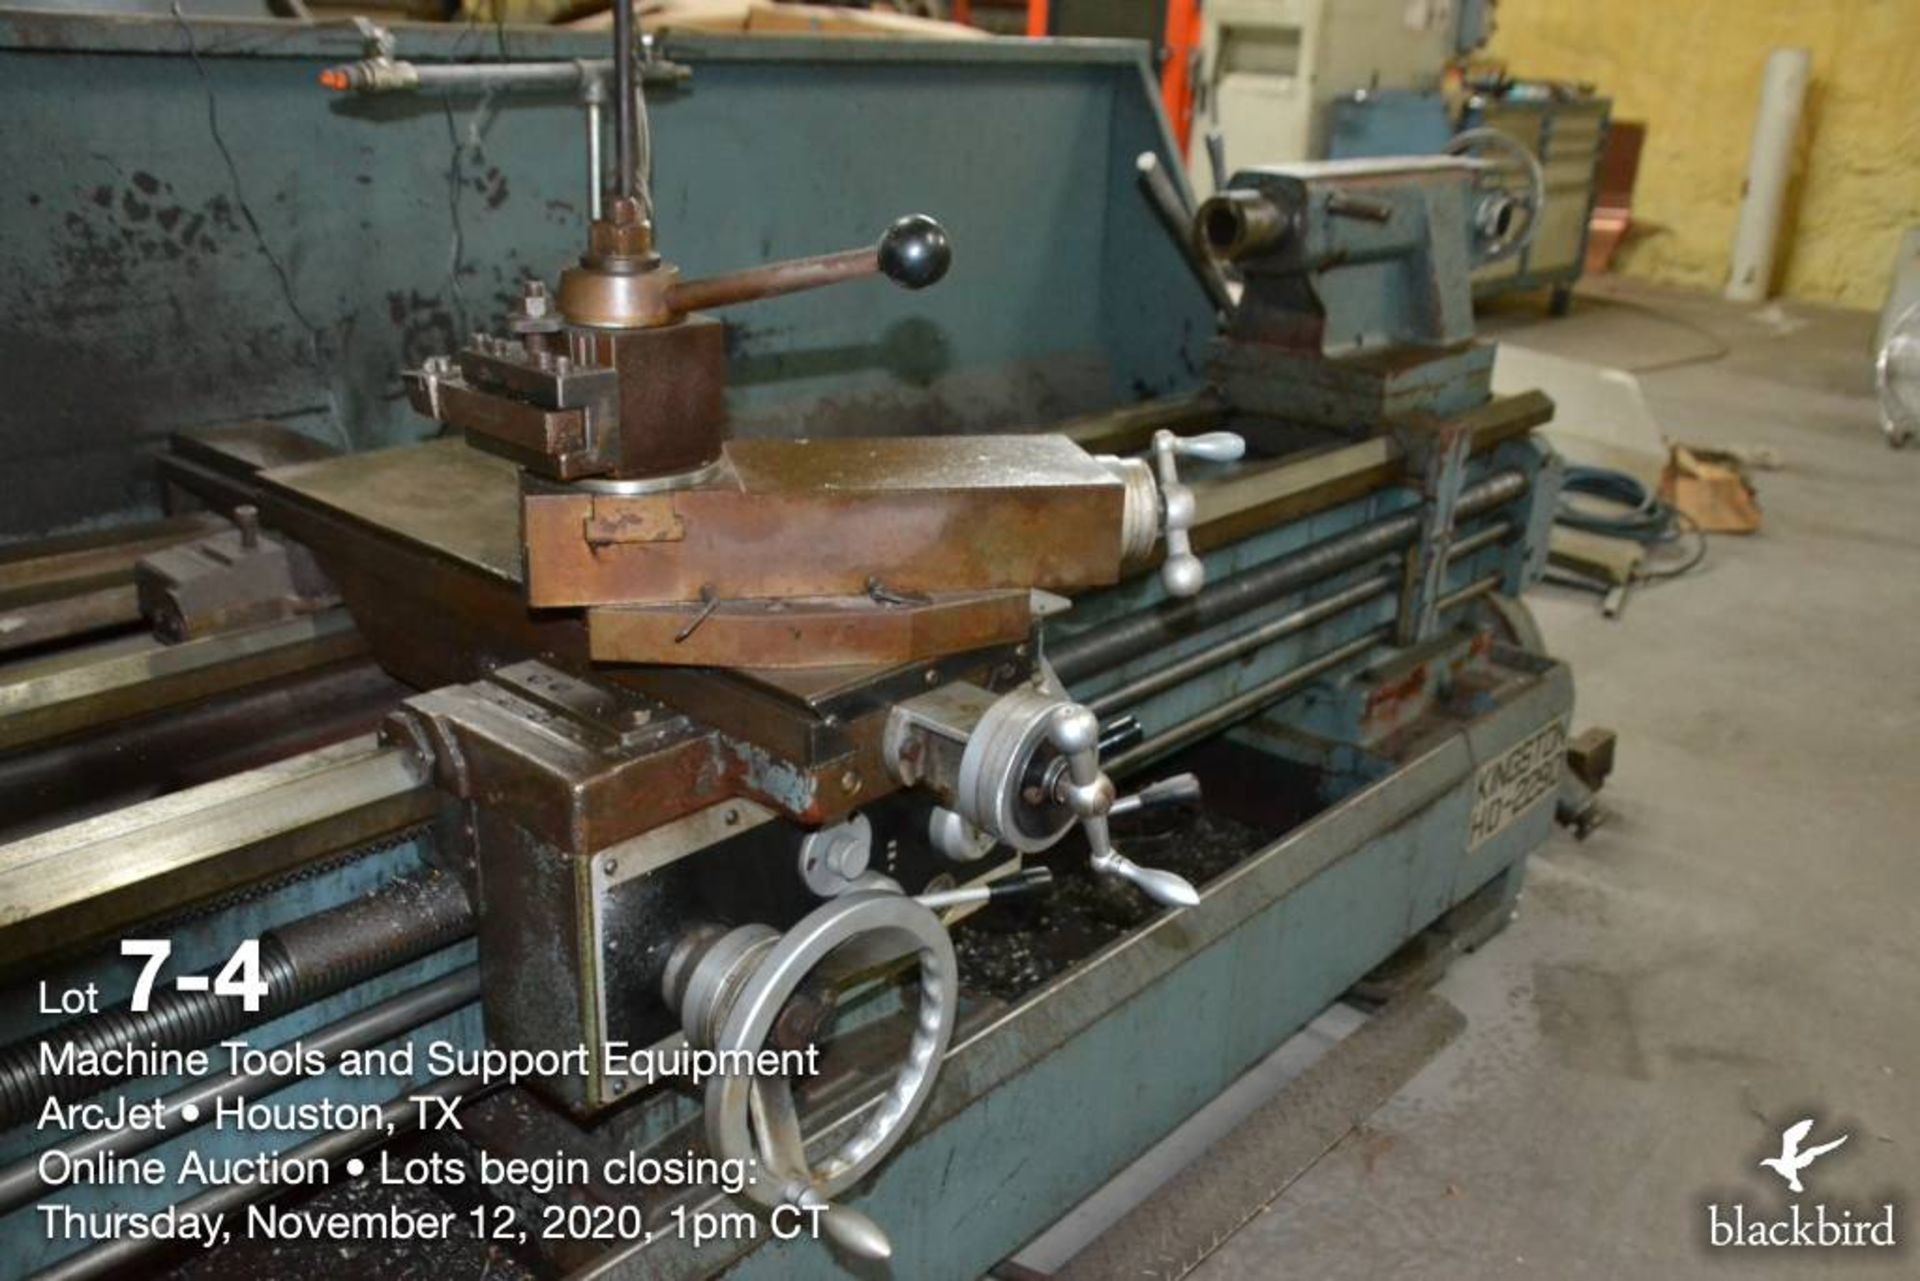 Engine lathe, Kingston HD 2290, 22 in x 90 in, metric & SAE threading, spindle bore 4 1/8 in, 2007 - Image 5 of 12